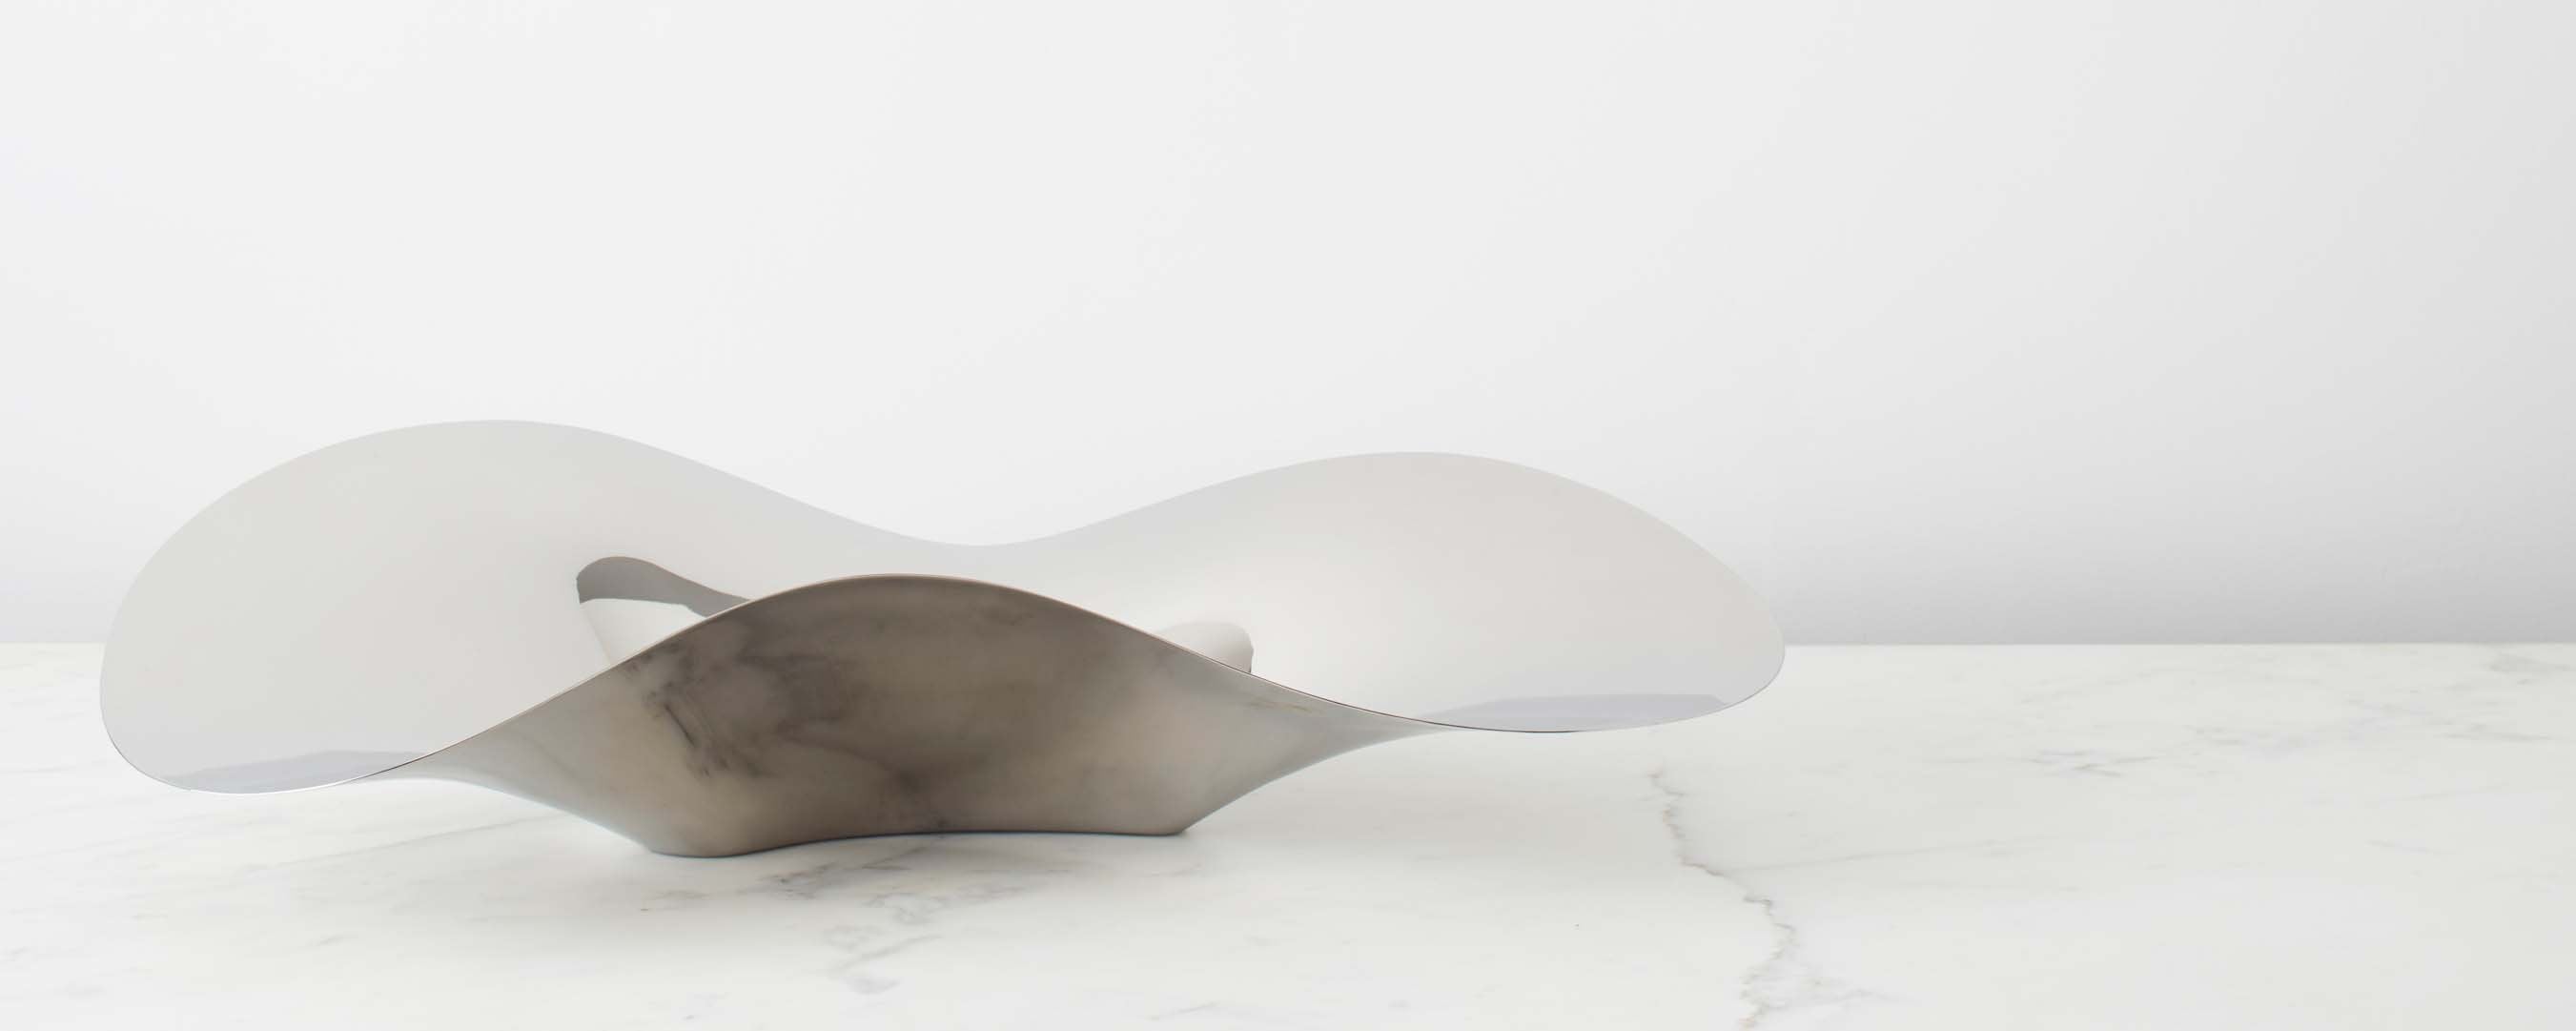 indulgence oyster tray by helle damkjær for georg jensen